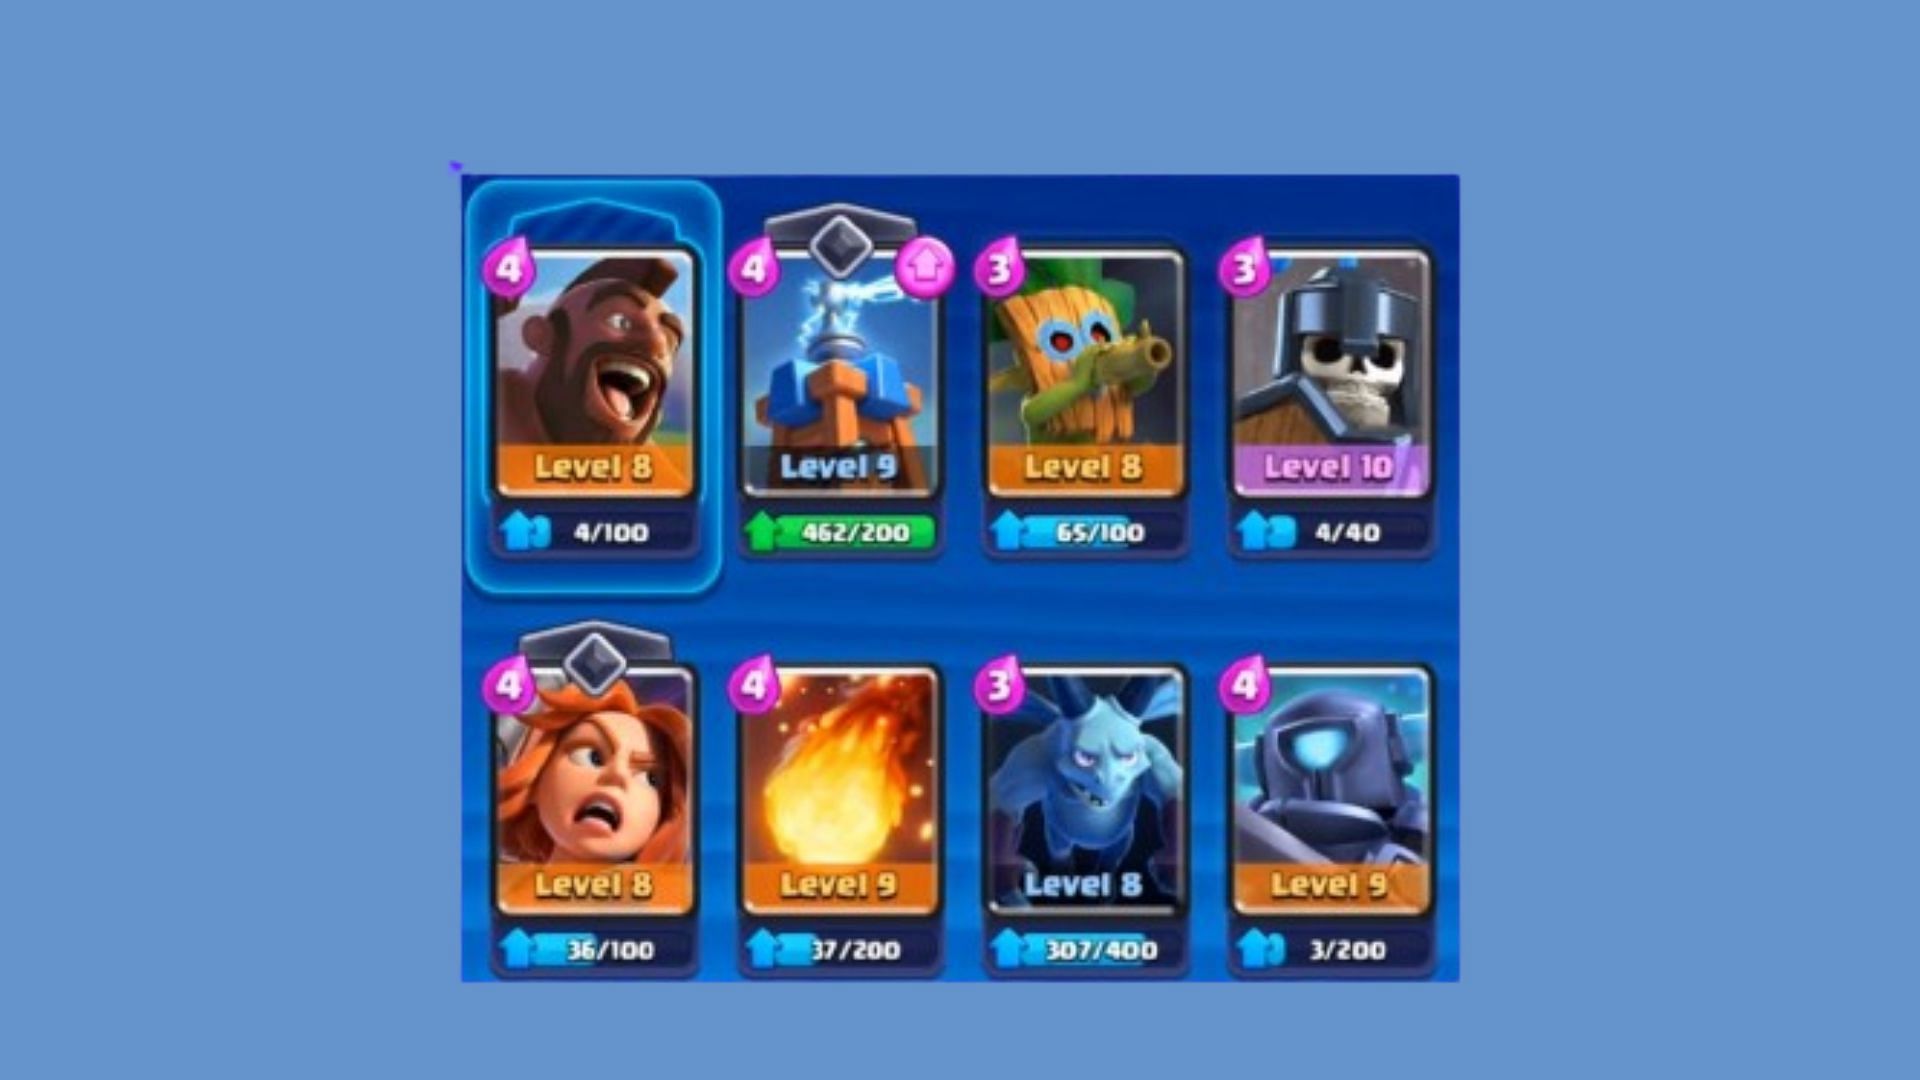 Only Area 10 deck in Conflict Royale